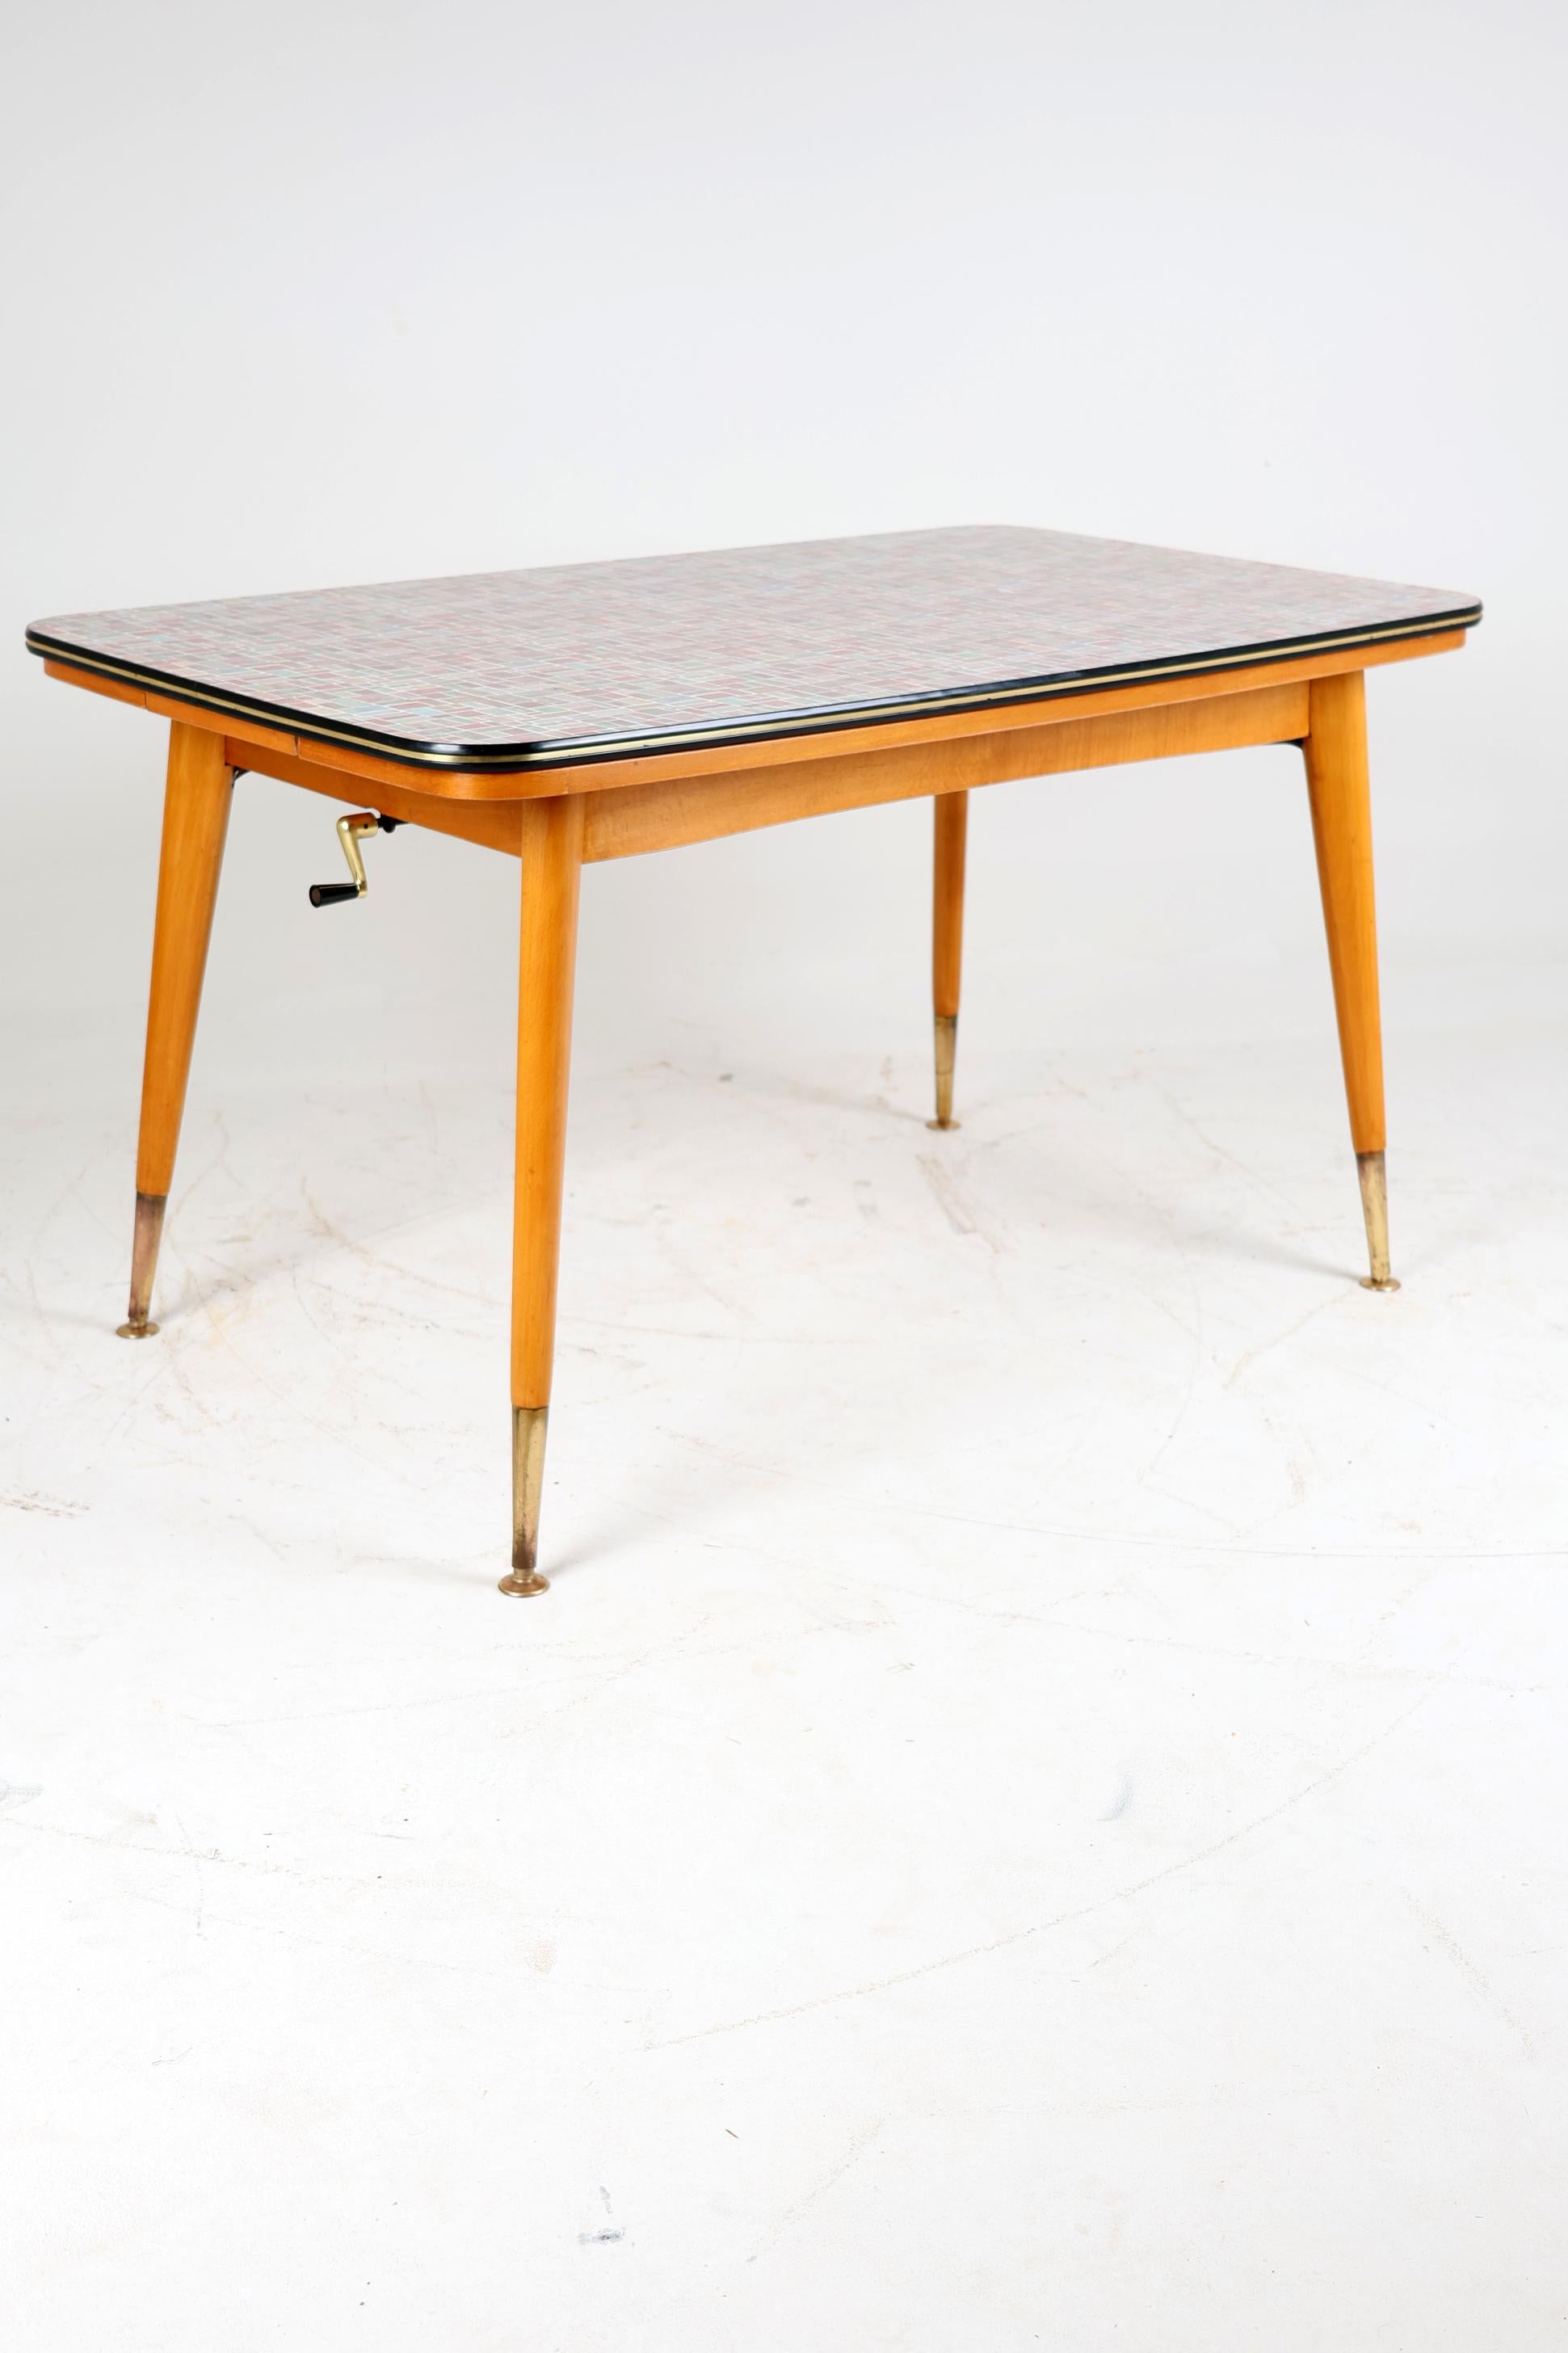 Vintage The Rockabilly Table 1960s

The table is decorated in the style of Rockabilly from the 60s. It has graphics on the top characteristic of the period. The table is height-adjustable and it is possible to add two smaller tops hidden under the